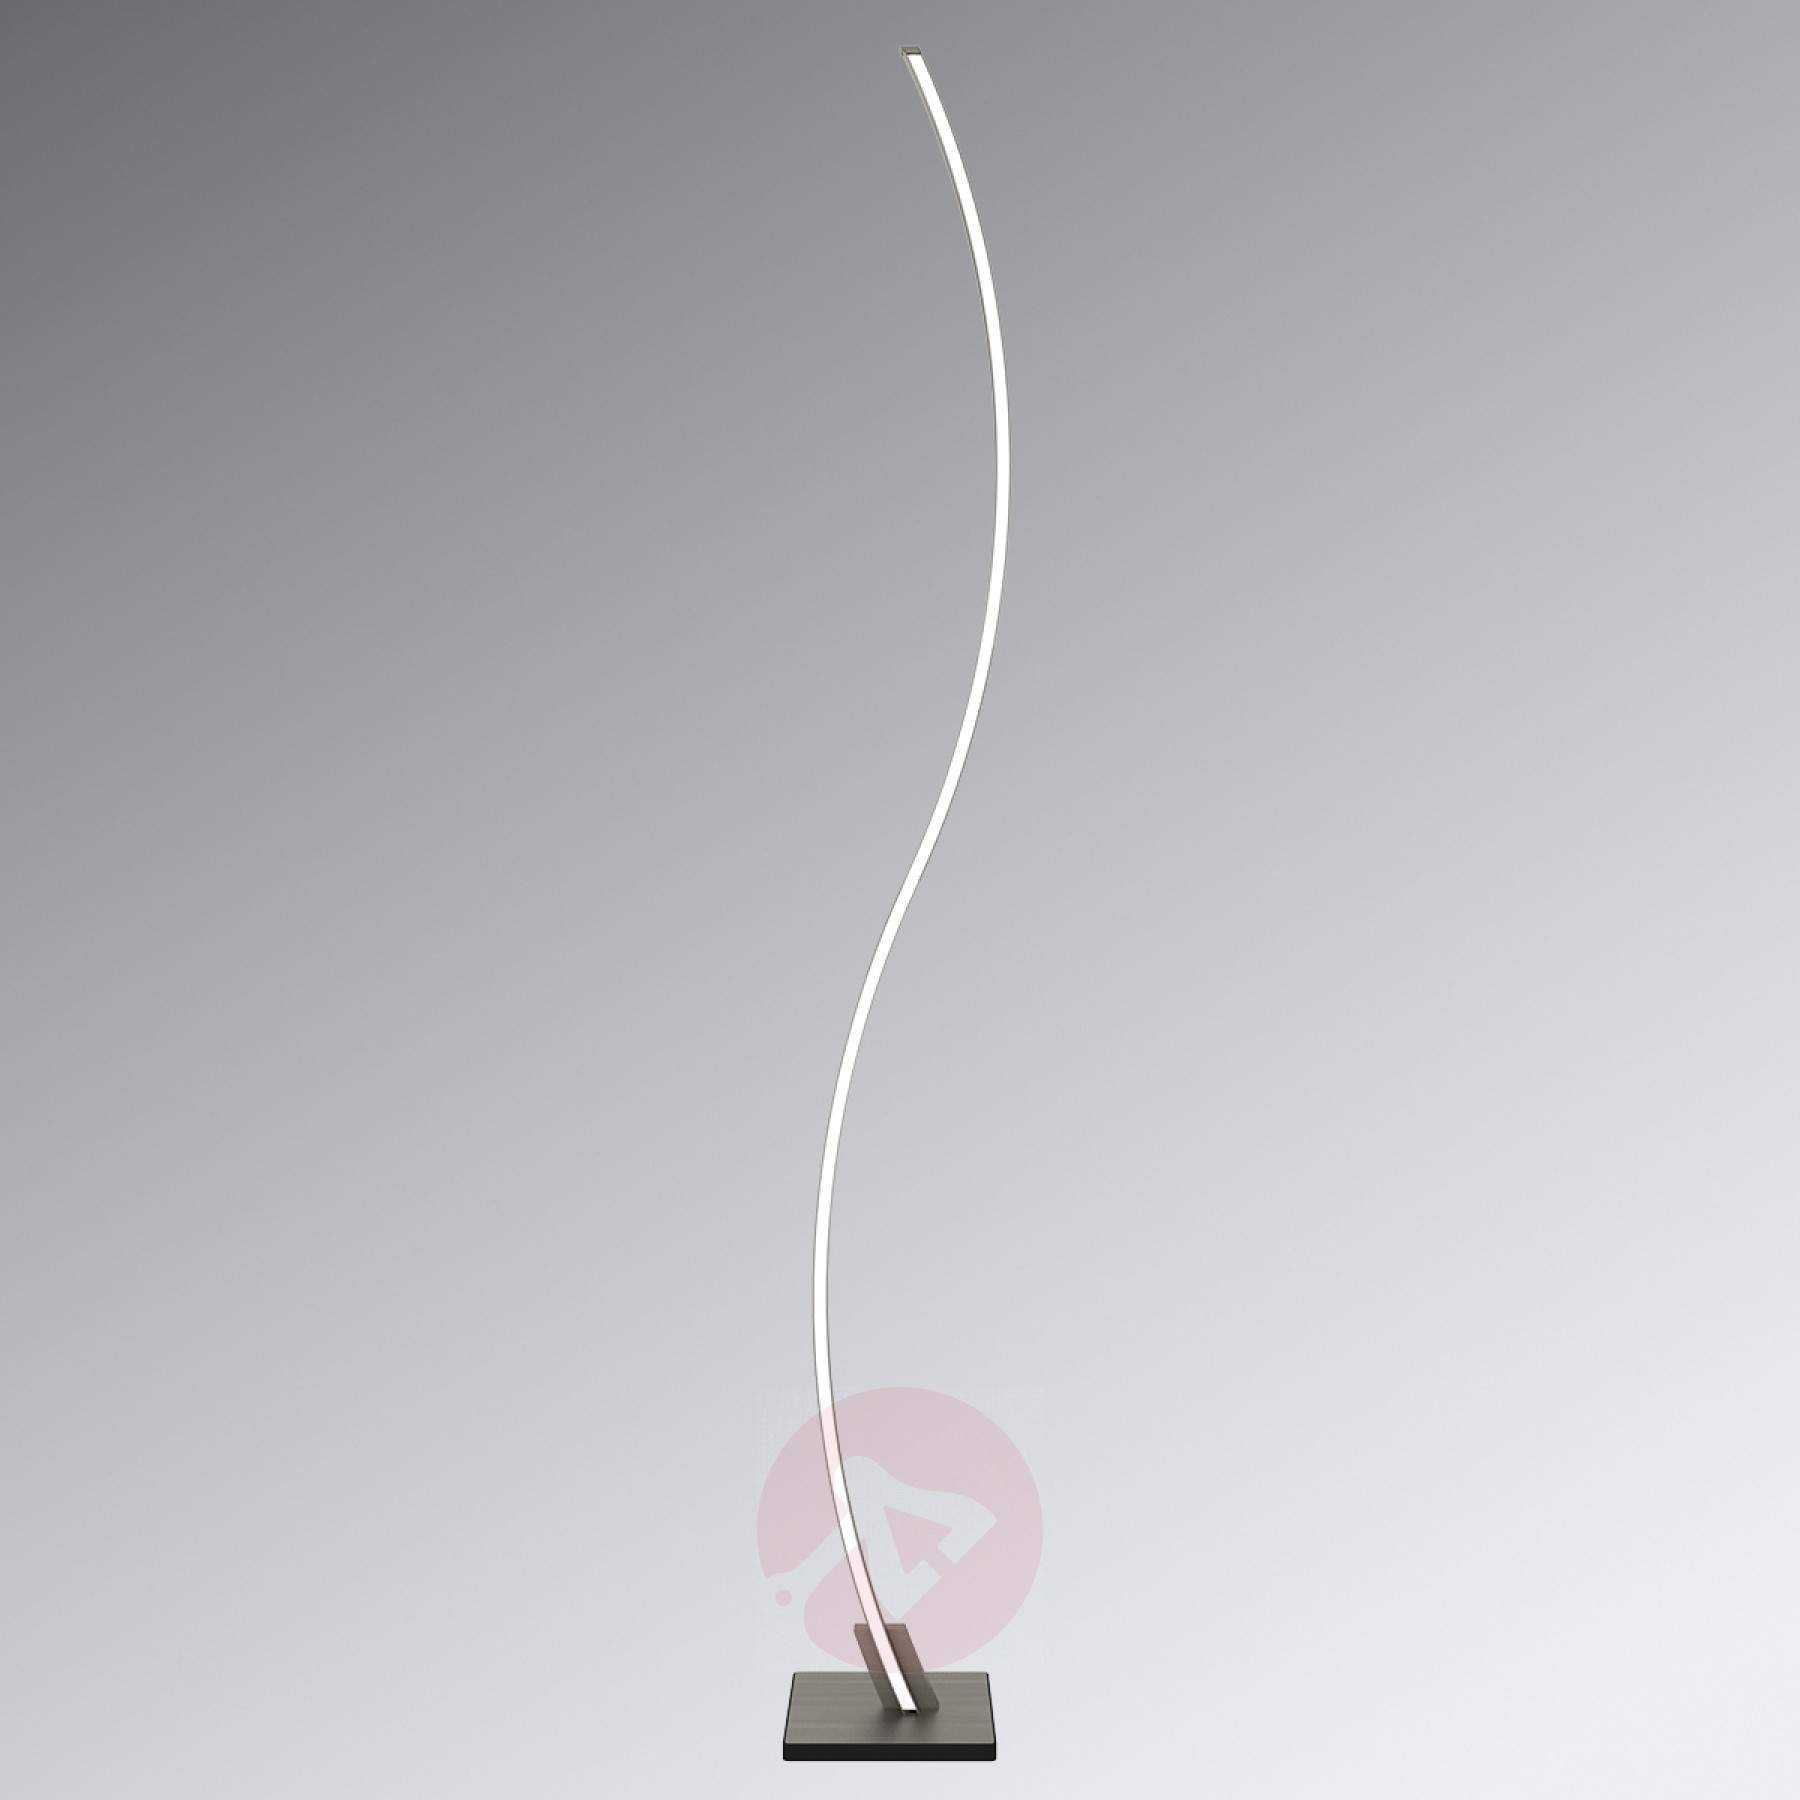 Swing Delicate Led Floor Lamp With Remote Control regarding sizing 1800 X 1800